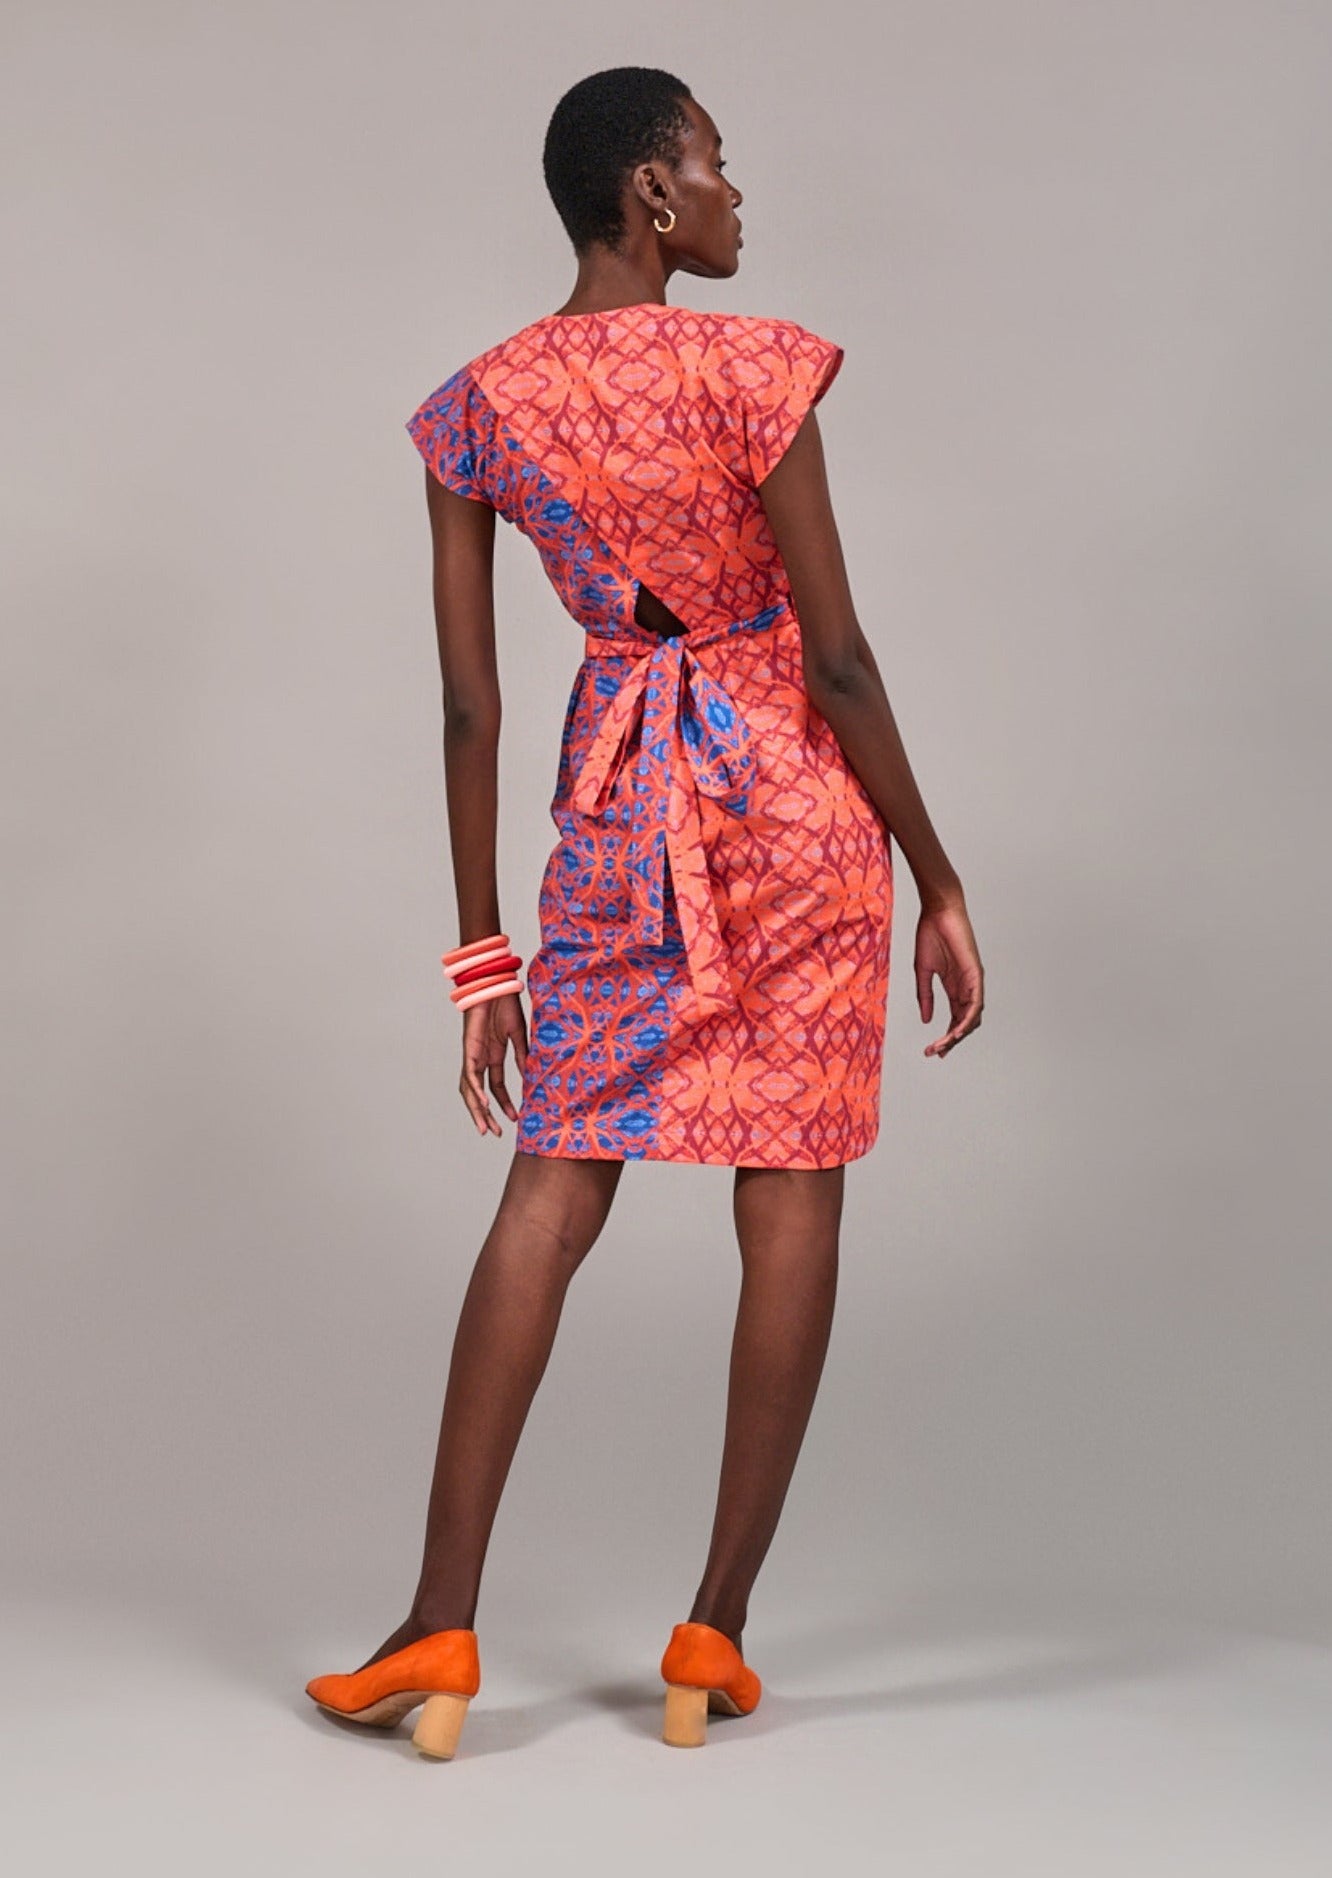 Model facing backwards wearing the KAHINDO Hermanus Wrap Dress showing the cut-out details and overlapping prints